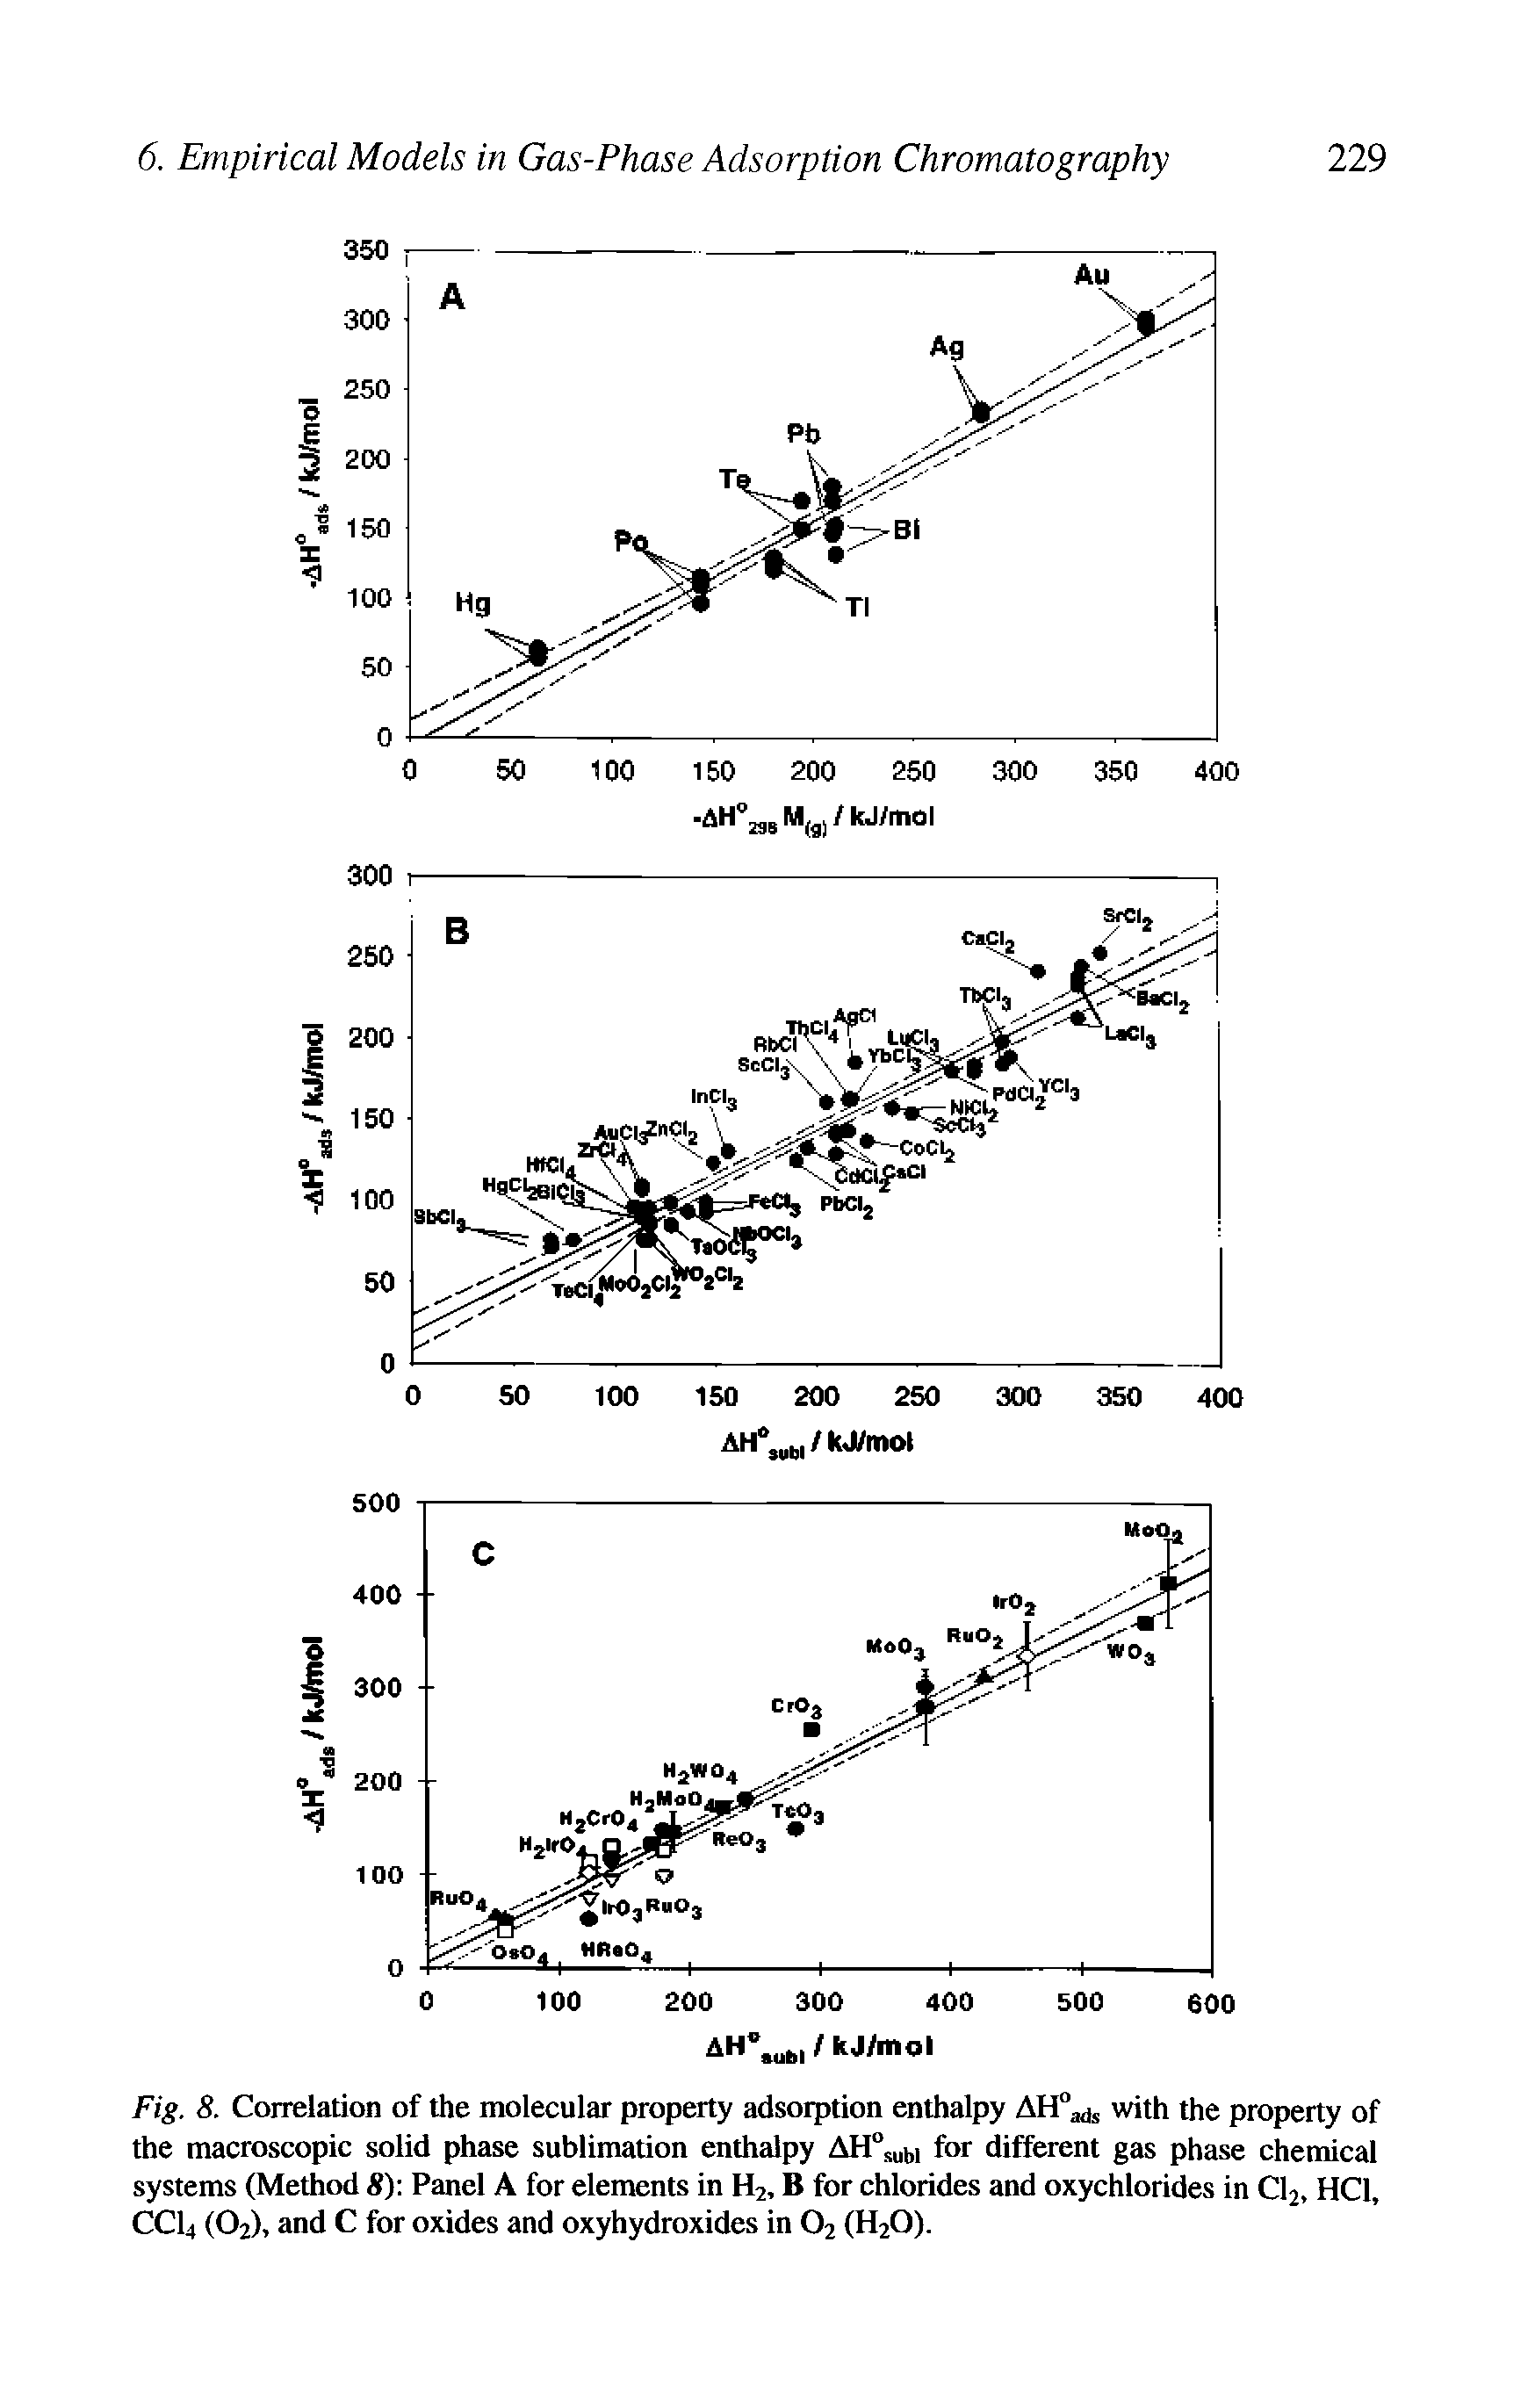 Fig. 8. Correlation of the molecular property adsorption enthalpy AH°ads with the property of the macroscopic solid phase sublimation enthalpy AH°subl for different gas phase chemical systems (Method 8) Panel A for elements in H2, B for chlorides and oxychlorides in Cl2, HC1, CC14 (02), and C for oxides and oxyhydroxides in 02 (H20).